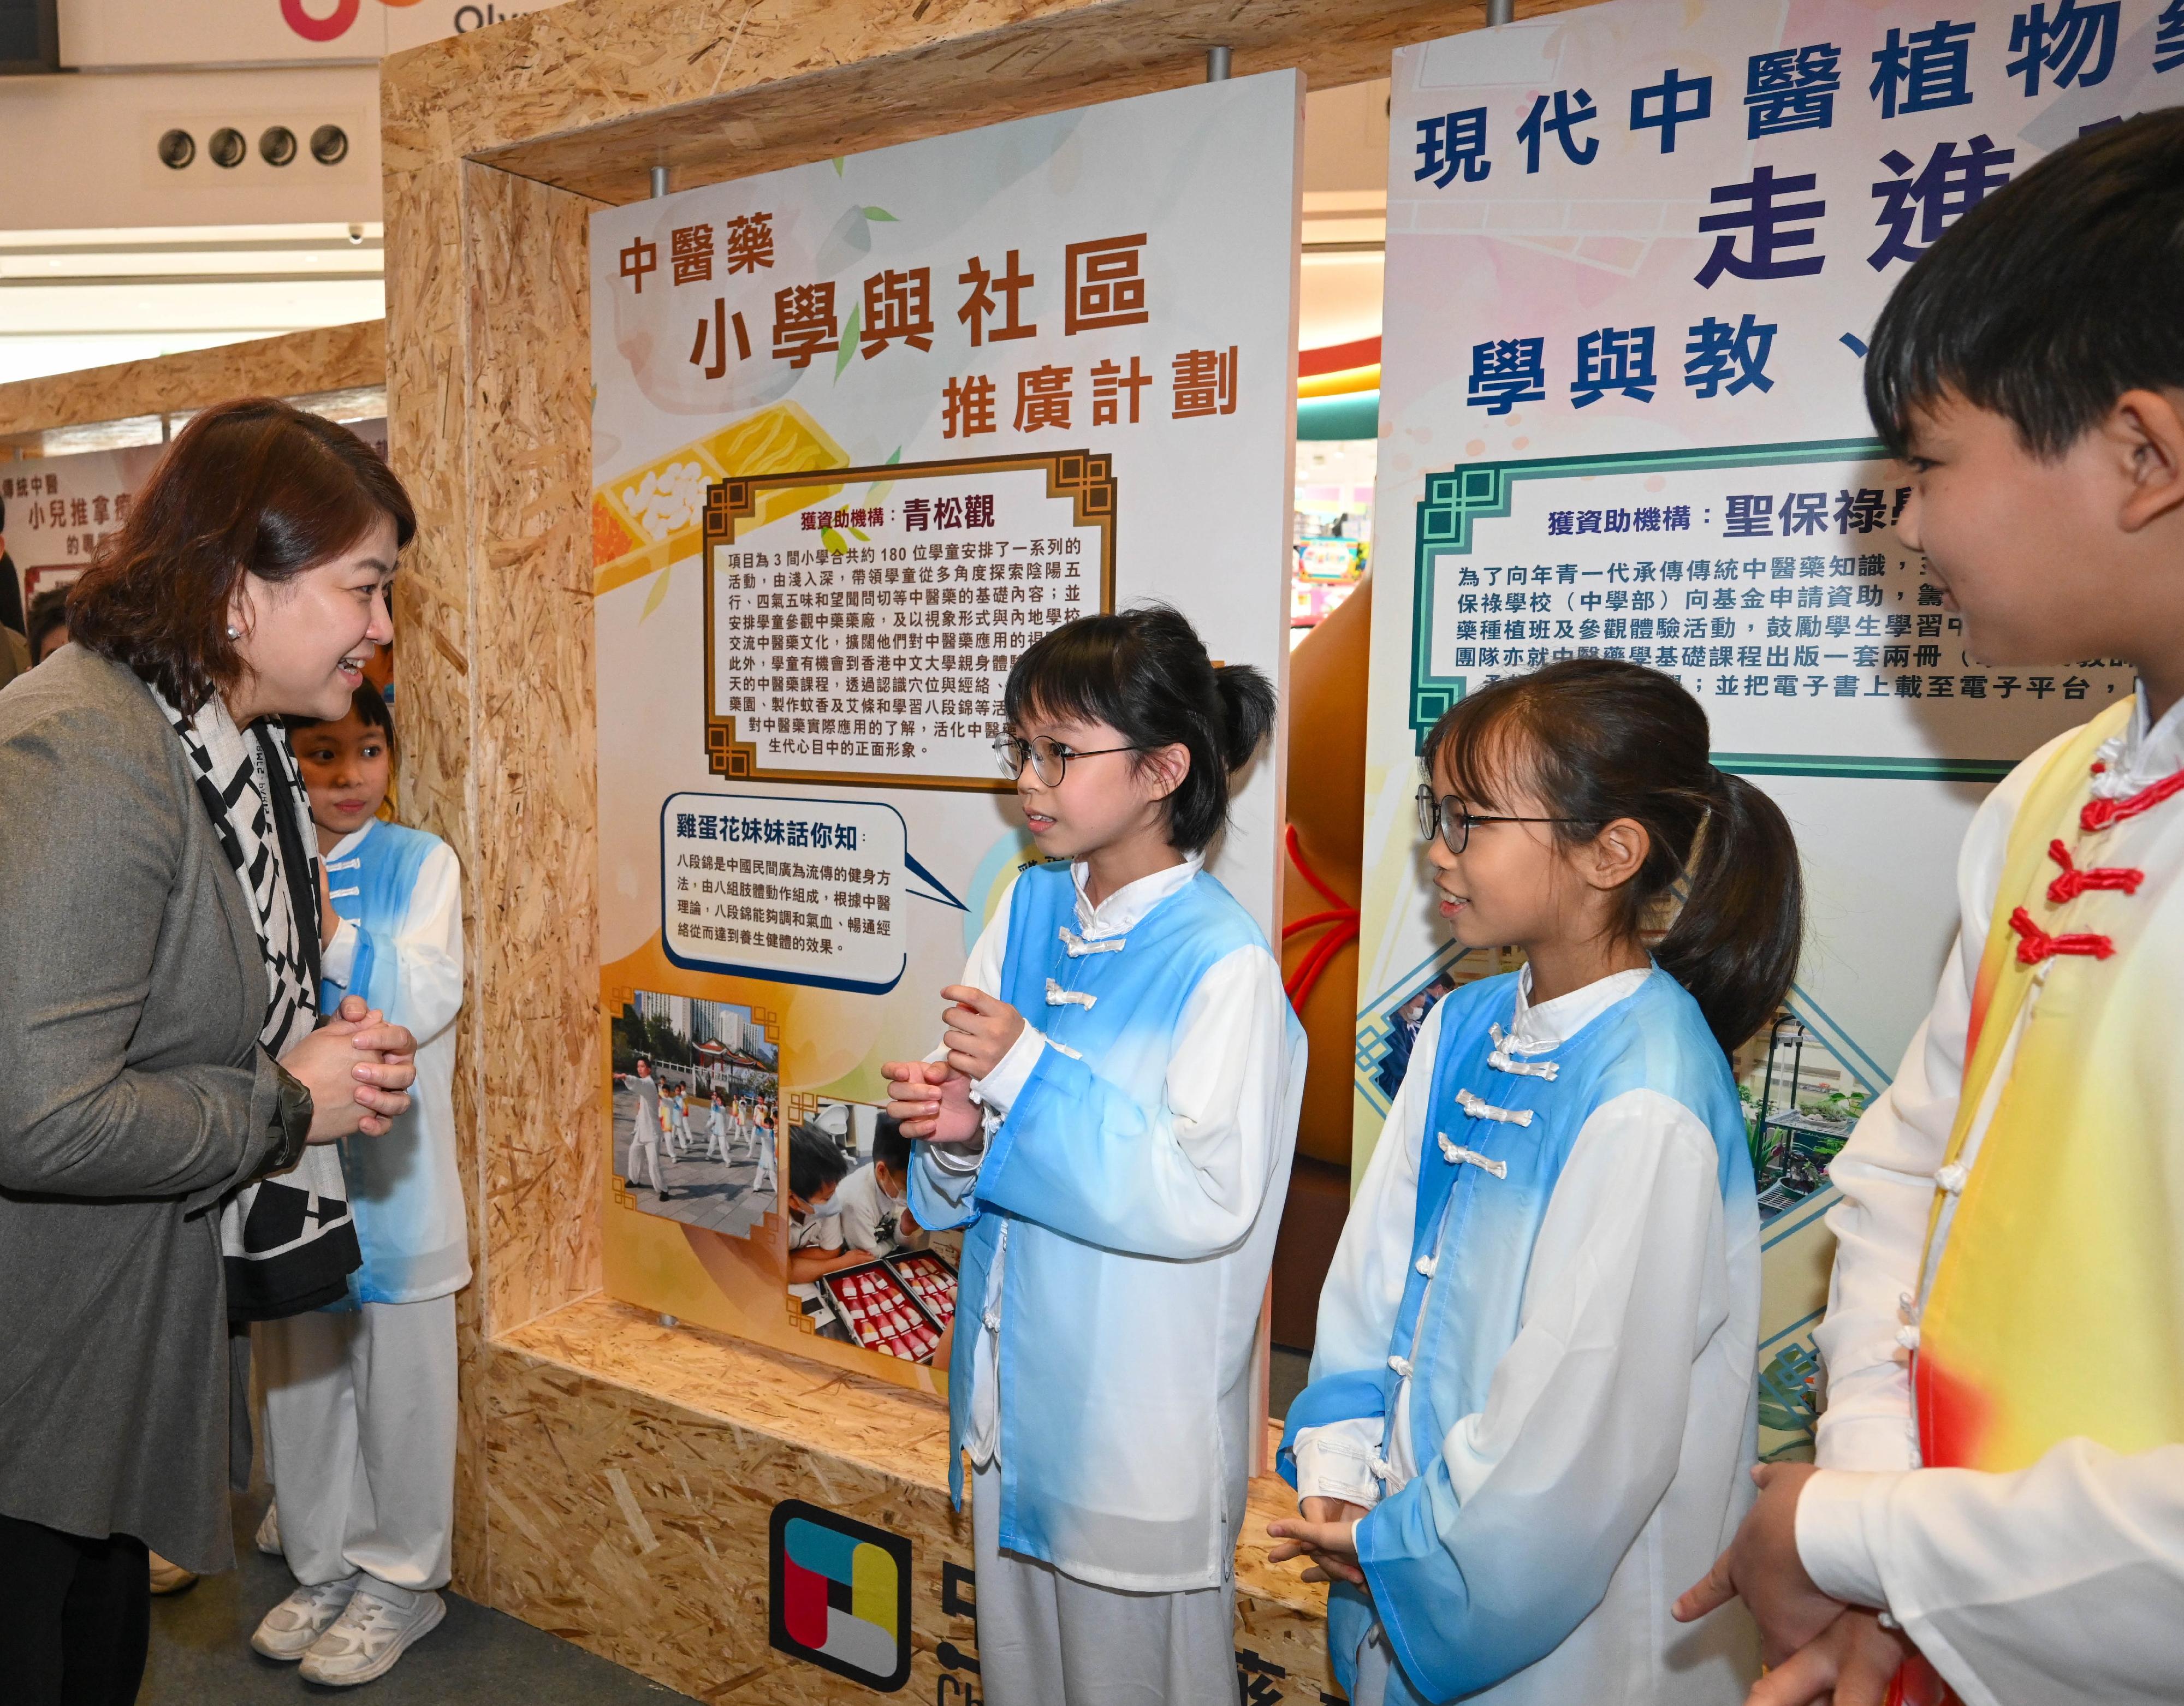 The Under Secretary for Health, Dr Libby Lee (first left), listens to a sharing by a student on a public education activity organised at her school with the support of the Chinese Medicine Development Fund (CMDF), and how she learned more about Chinese medicine through the activity, at the opening ceremony of the CMDF showcase event today (March 8).